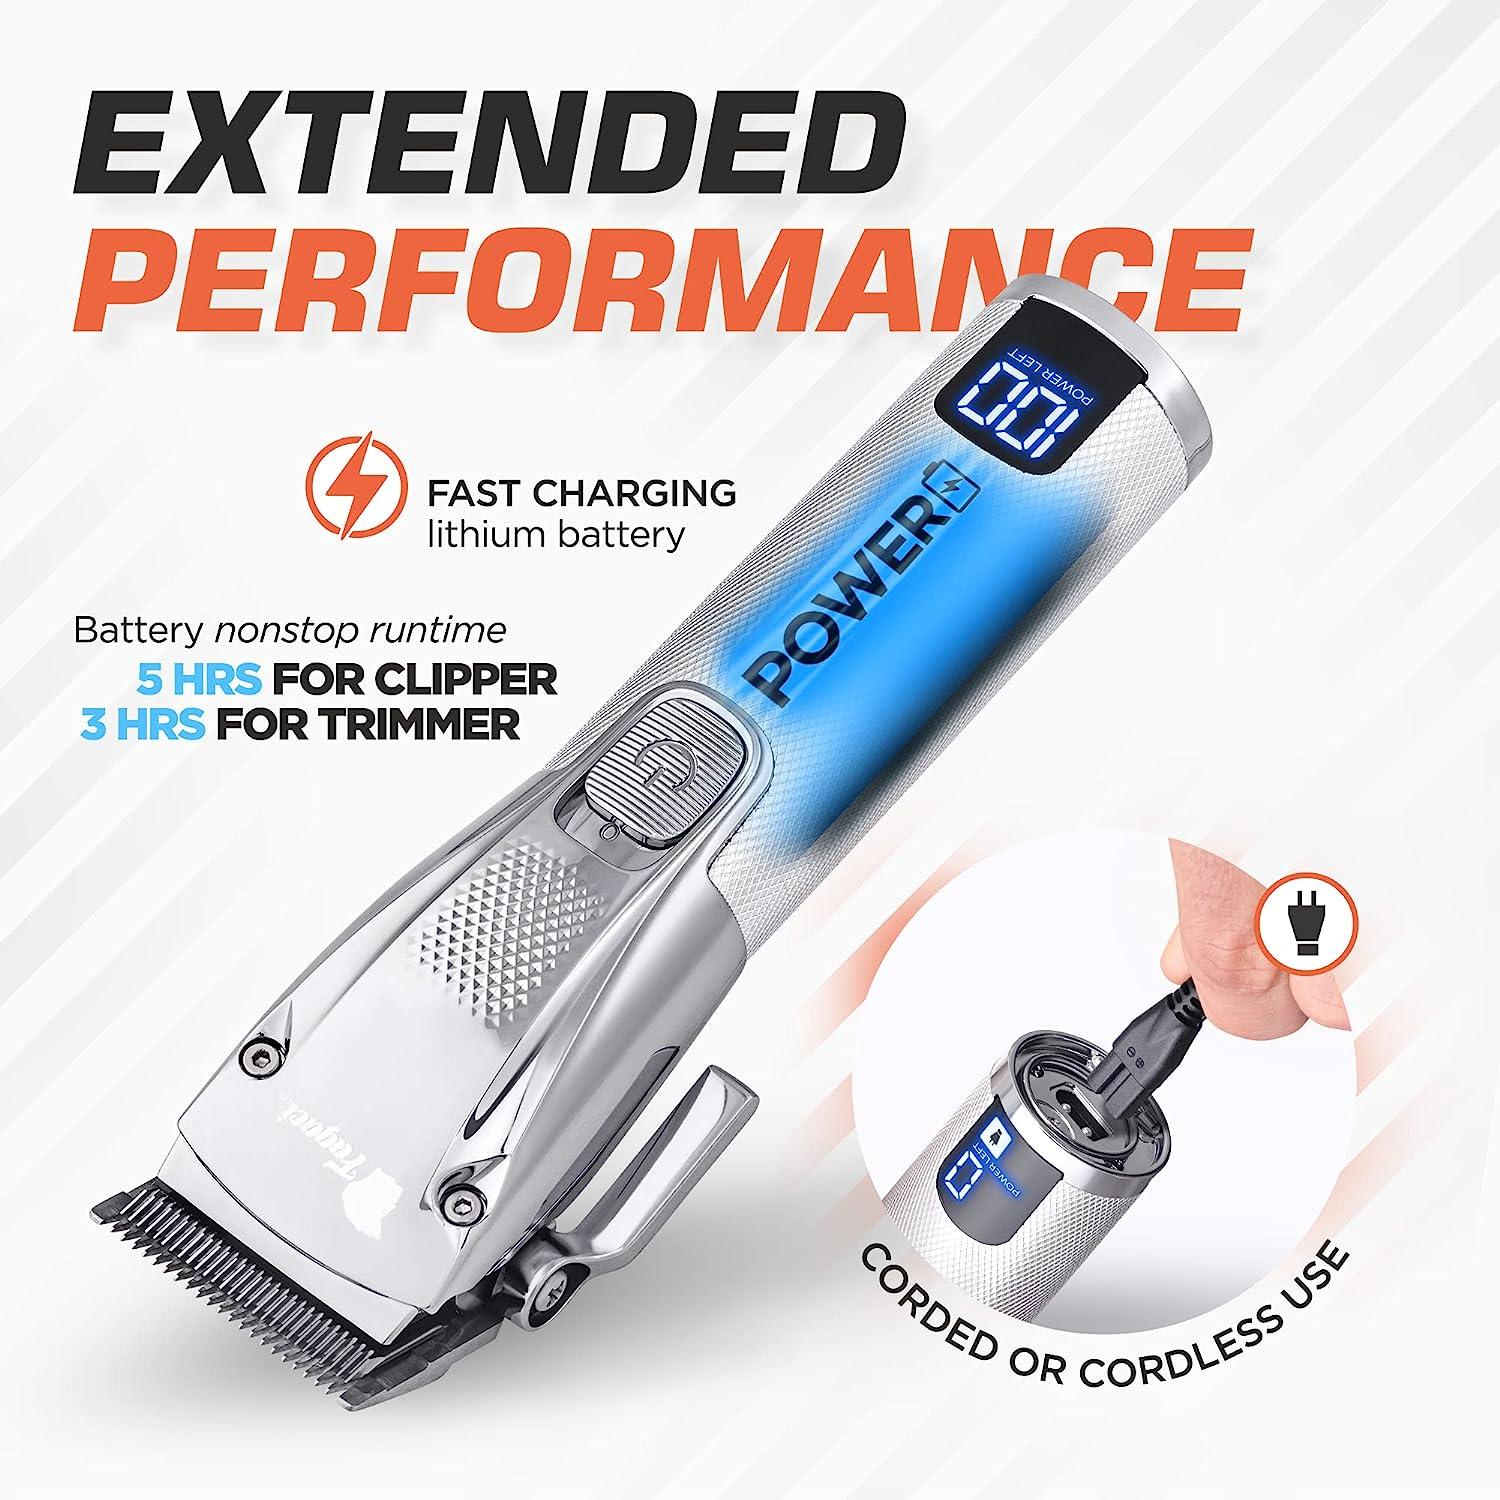 de Barber Precise with Clippers Hair for Power Hair Maquina Men Clippers Fagaci Cabello, Kit Cutting, Clippers Set, Set for Turbo Cutting, Barber Cortar and Trimmers Haircut Hair Cordless Professional